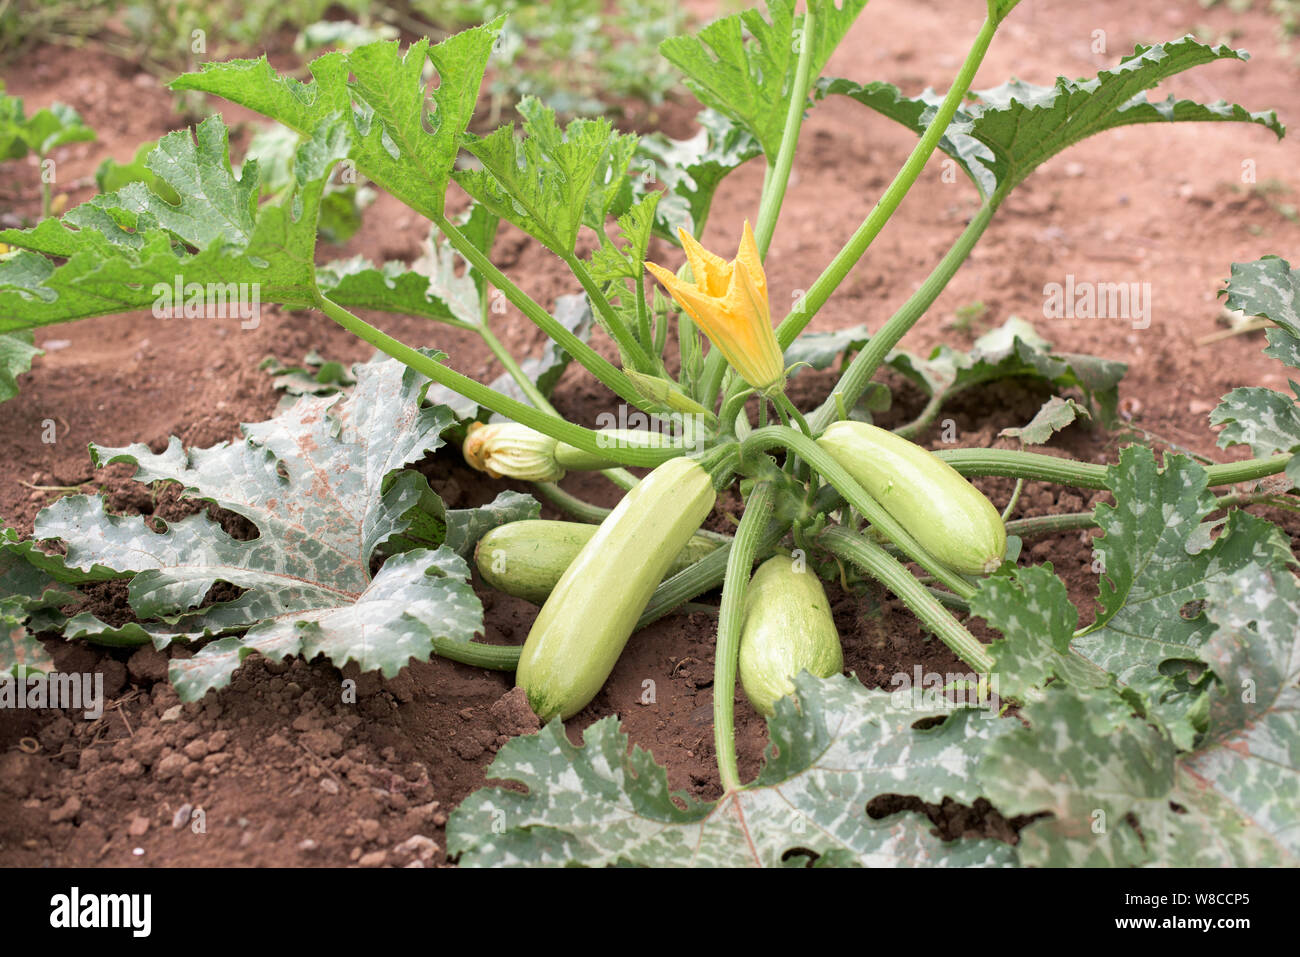 Coseup of a courgette marrow squash plant with fruits growing in a vegetable garden field Stock Photo